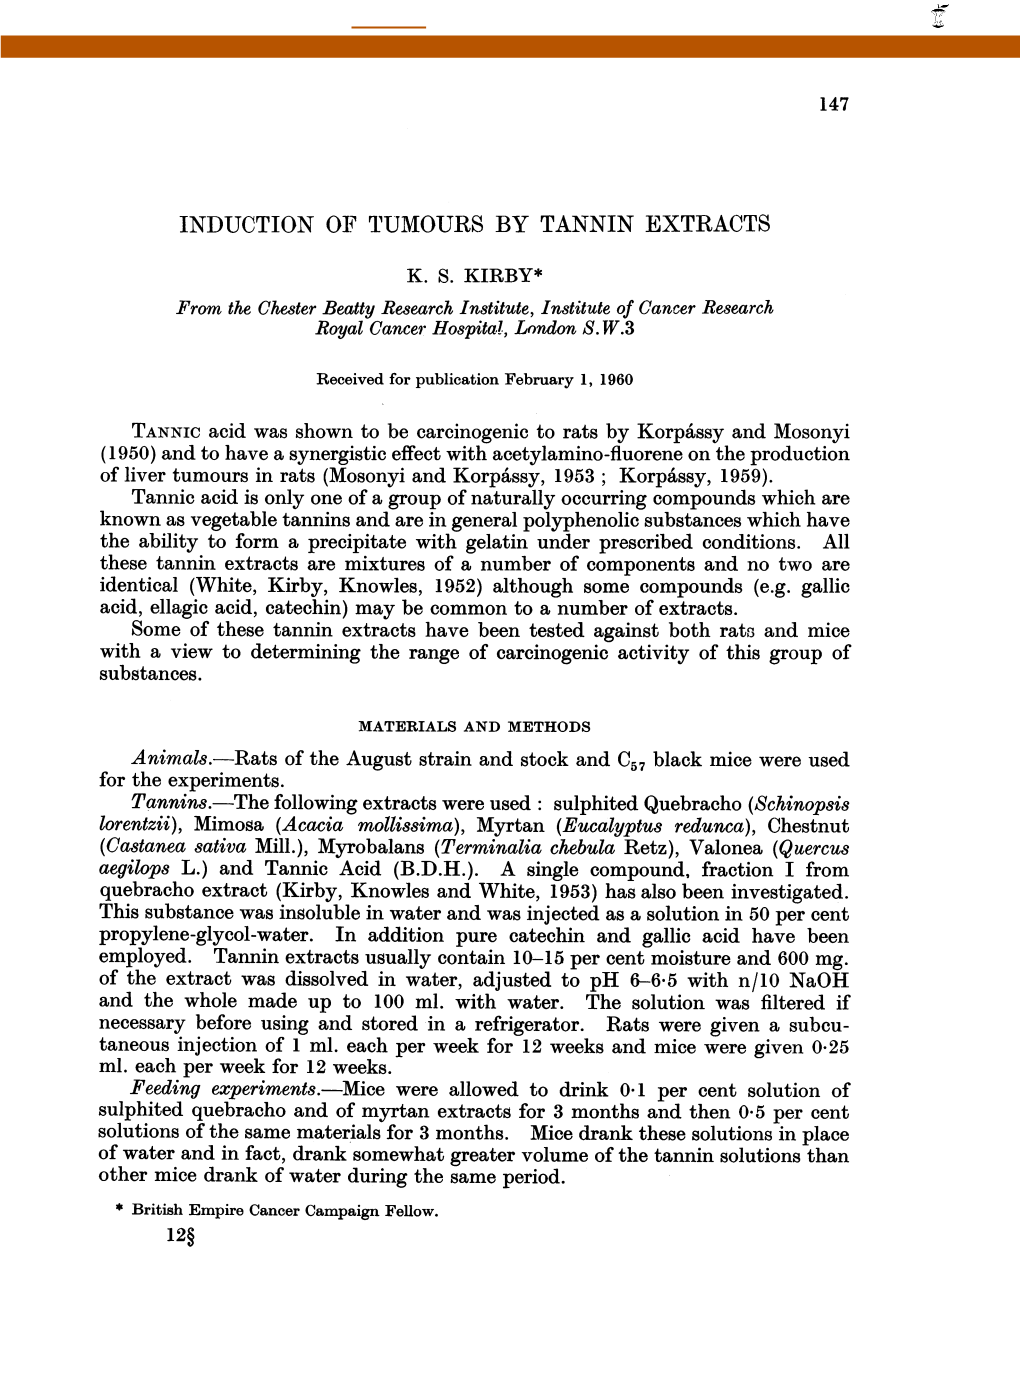 Induction of Tumours by Tannin Extracts